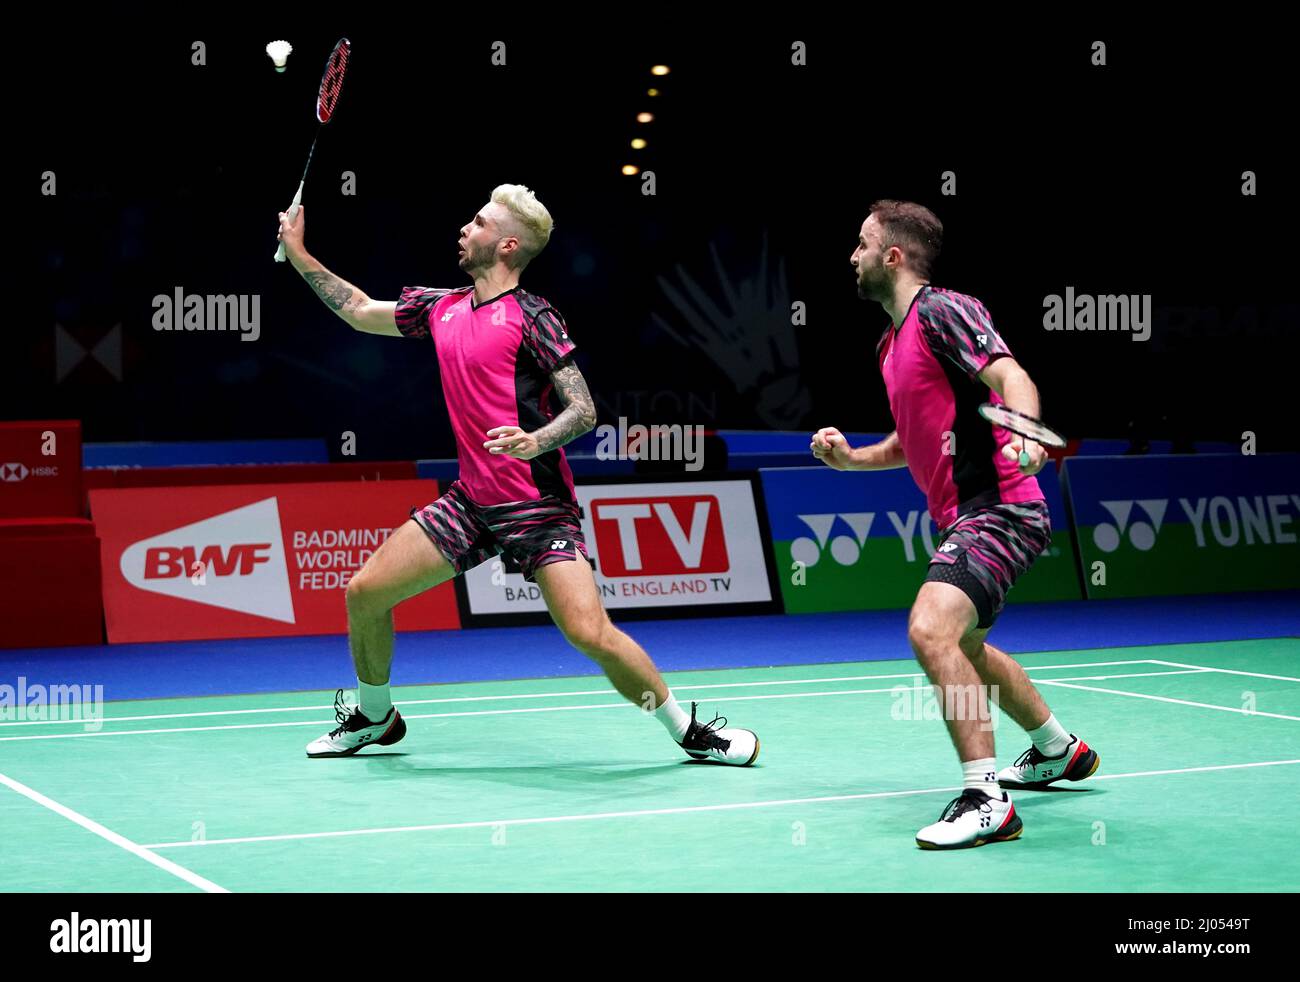 Englands Ben Lane and Sean Vendy (left) in action against Malaysias Tan Kian Meng and Tan Wee Kiong during day one of the YONEX All England Open Badminton Championships at the Utilita